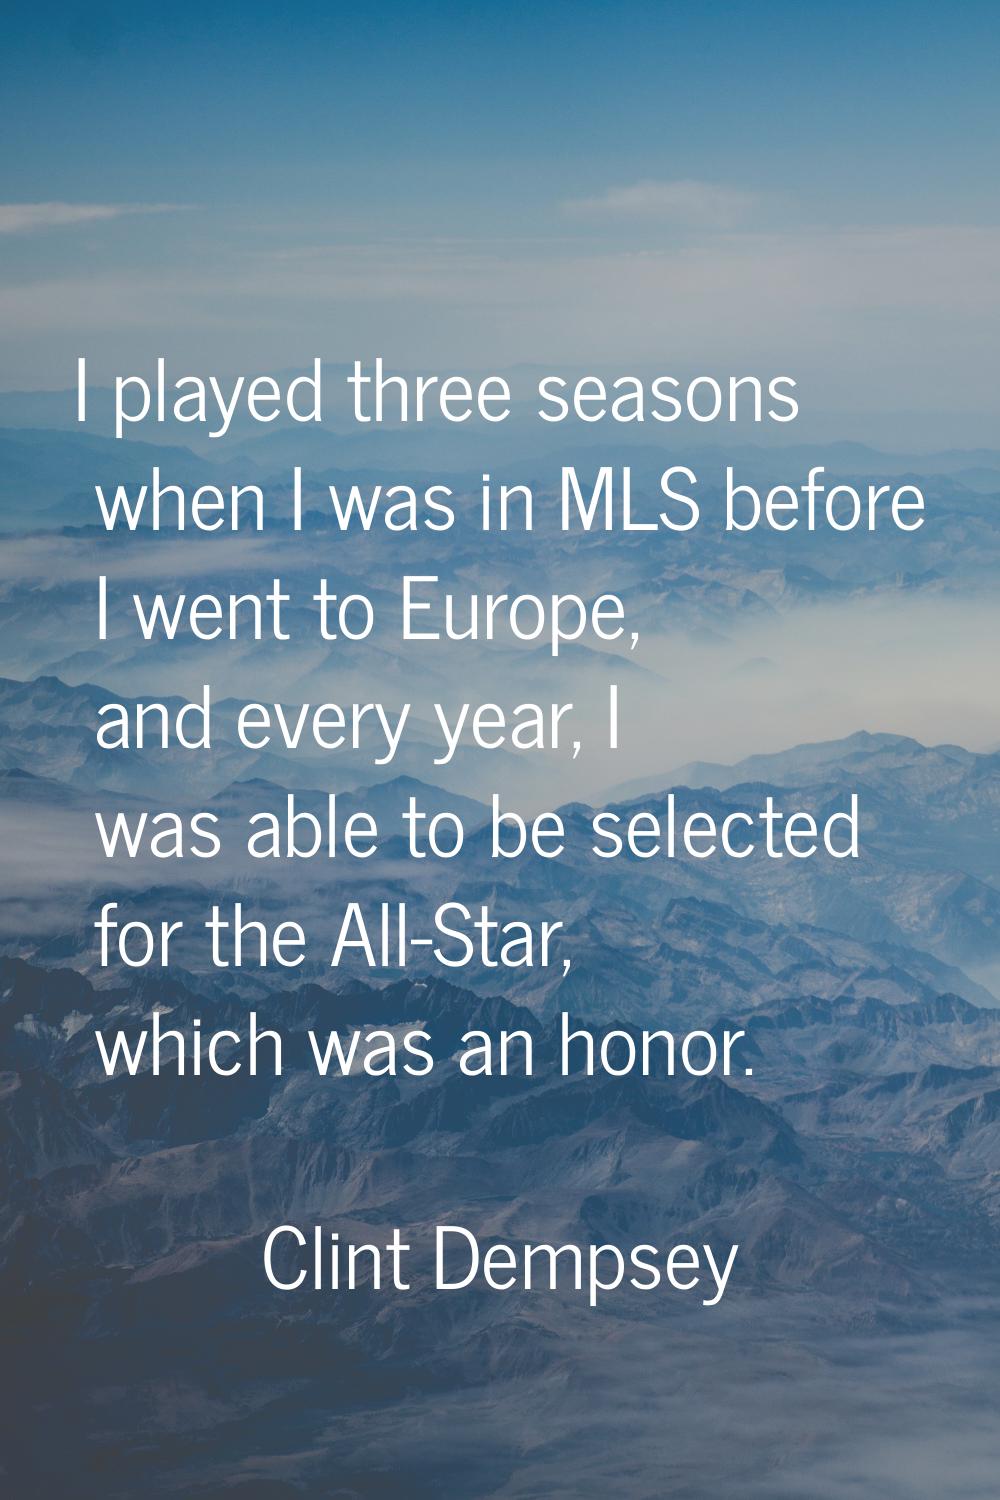 I played three seasons when I was in MLS before I went to Europe, and every year, I was able to be 